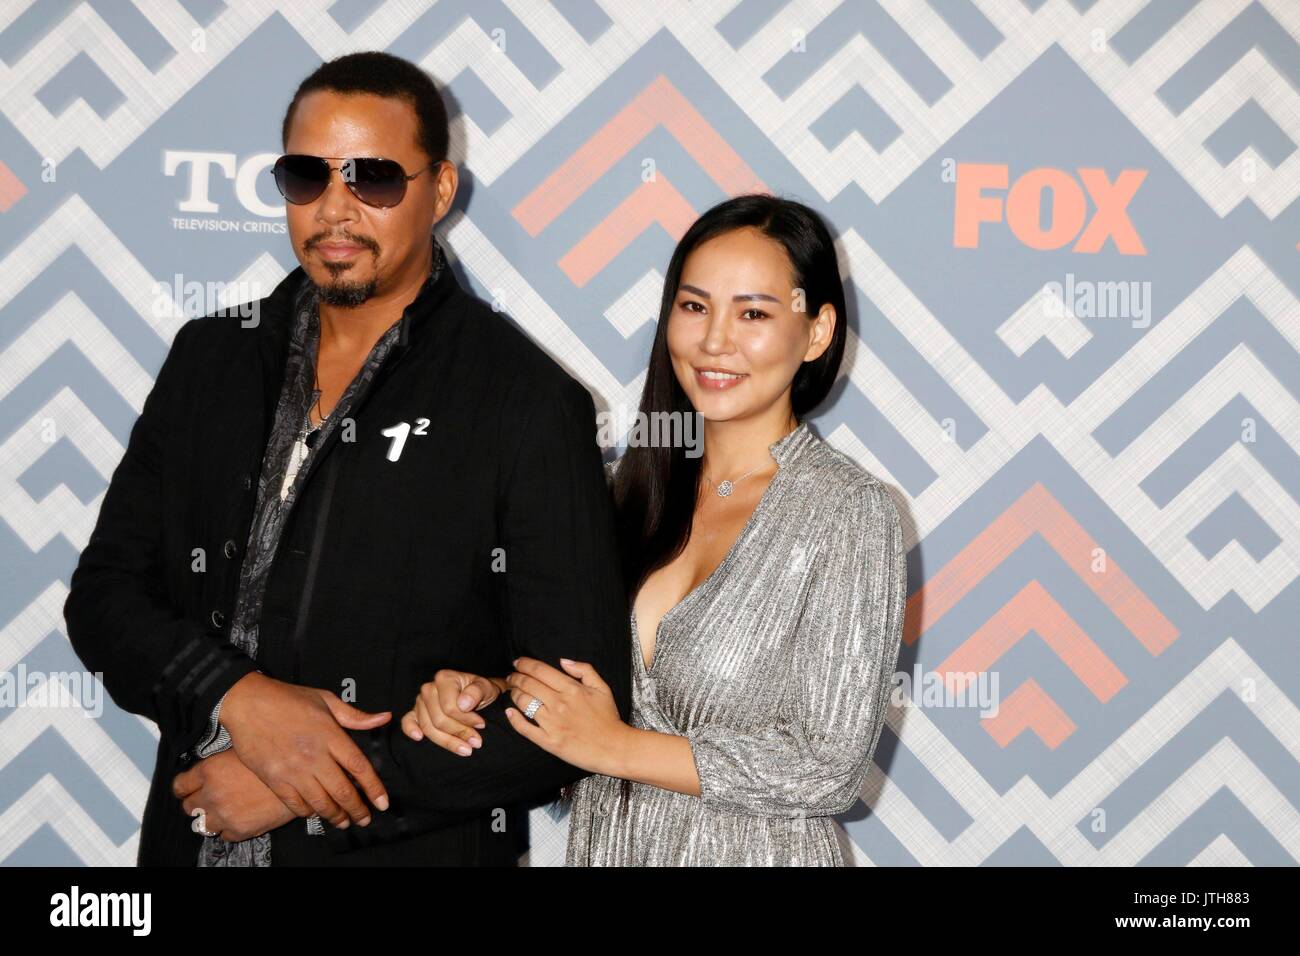 Terrence Howard, Miranda Pak at arrivals for Fox TCA After Party Red Carpet - Part 2, Soho House West Hollywood, Los Angeles, CA August 8, 2017. Photo By: Priscilla Grant/Everett Collection Stock Photo